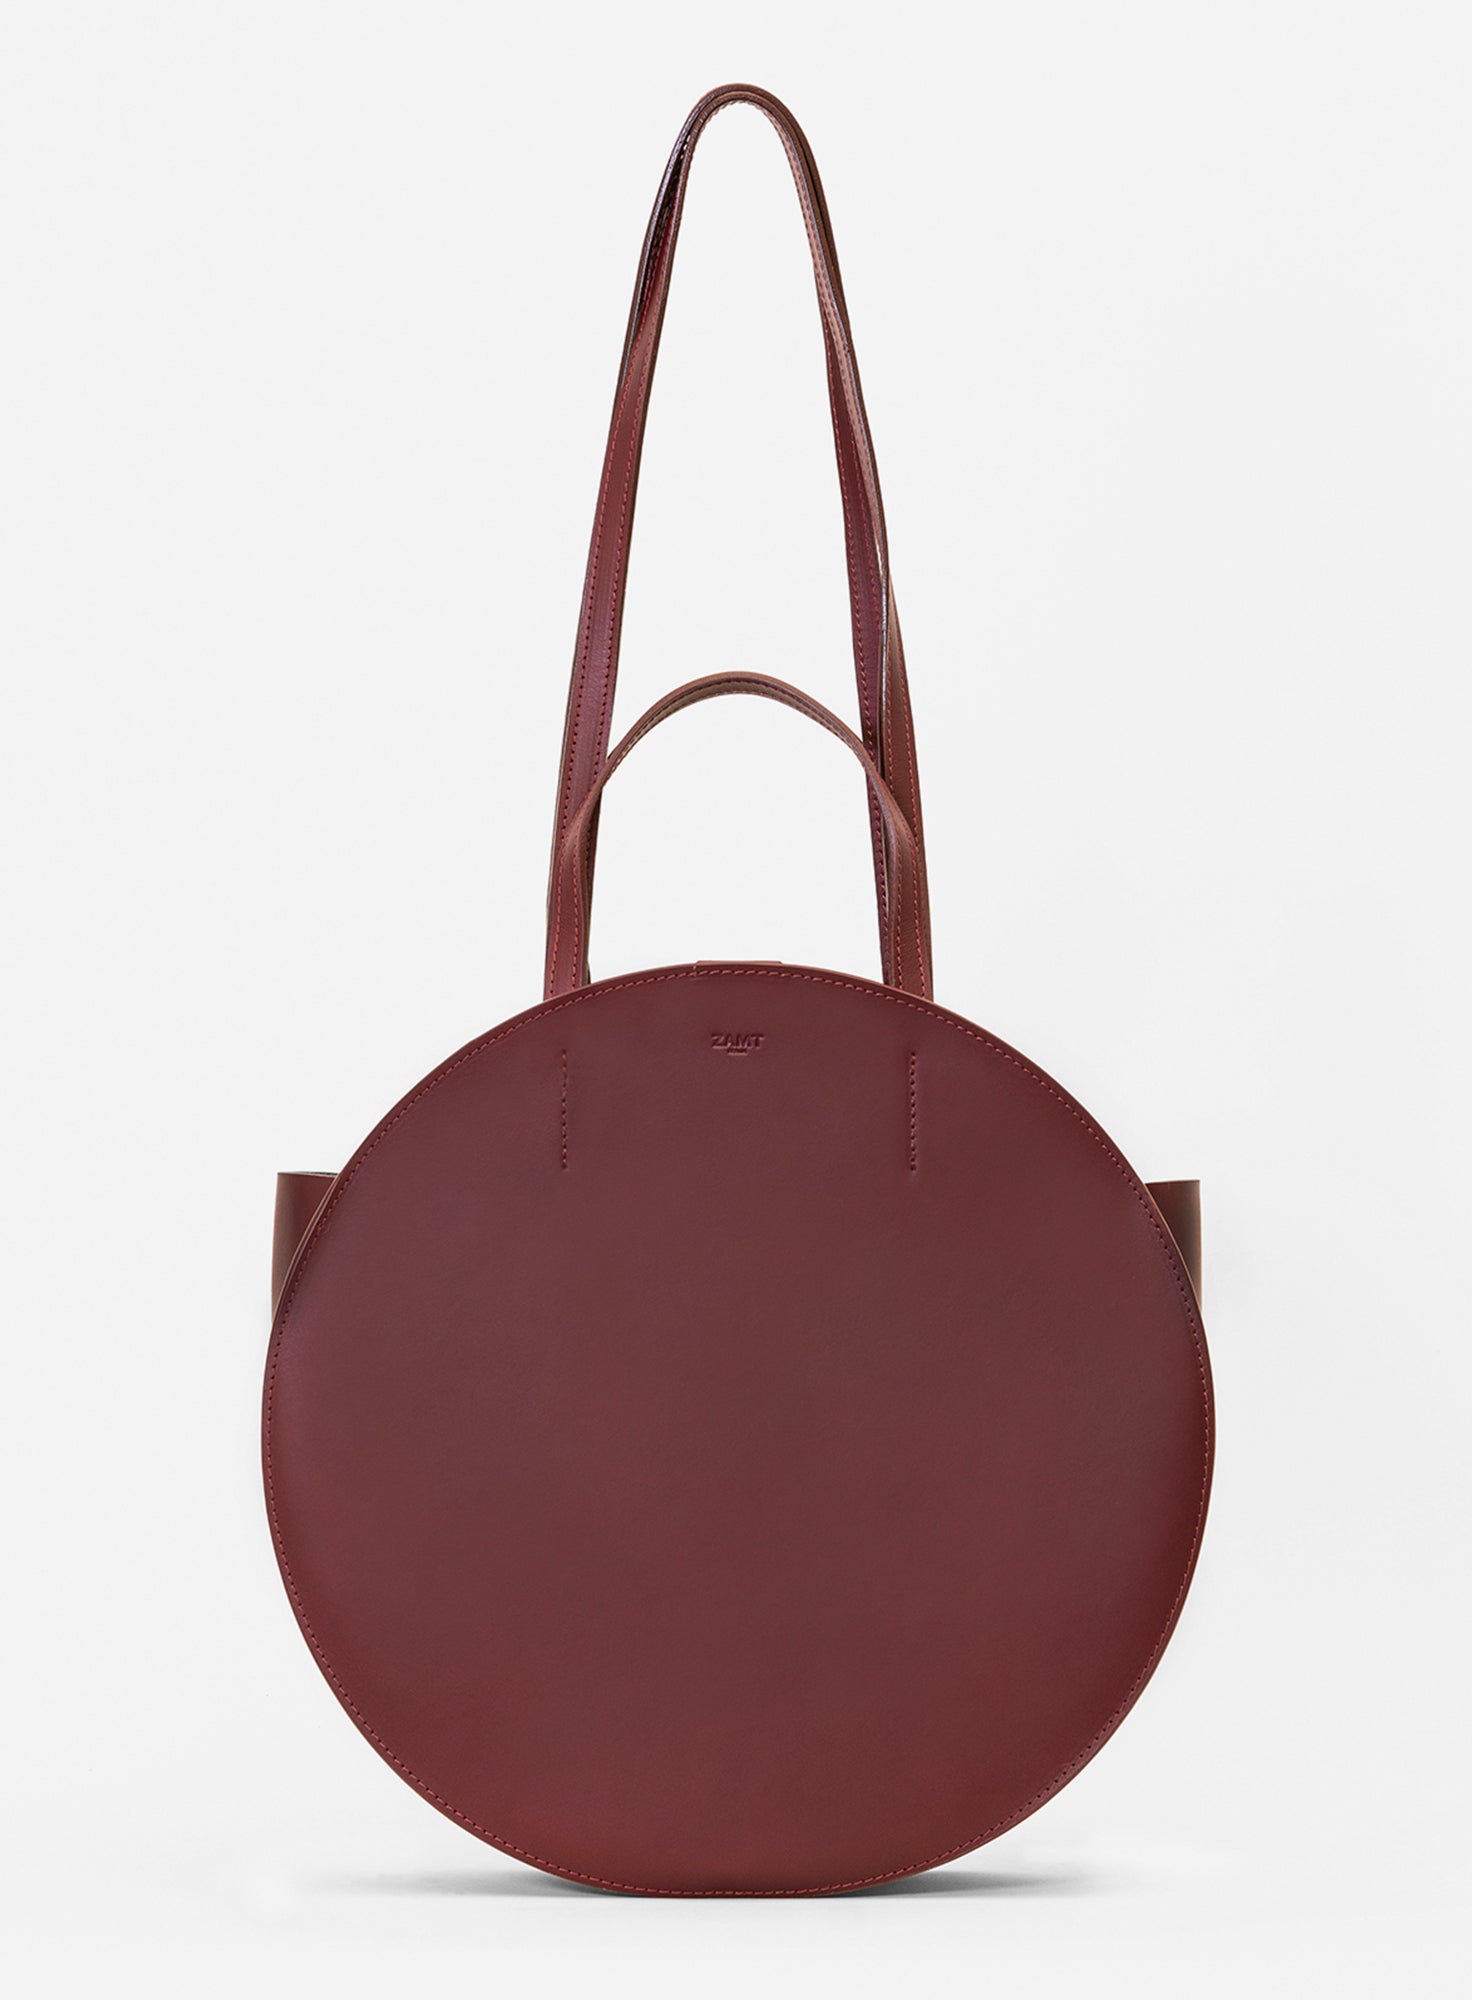 ROUND_Bag_Myra_Bordeaux_Designed_in_Berlin_Made_to_last_Handmade_in_Portugal.